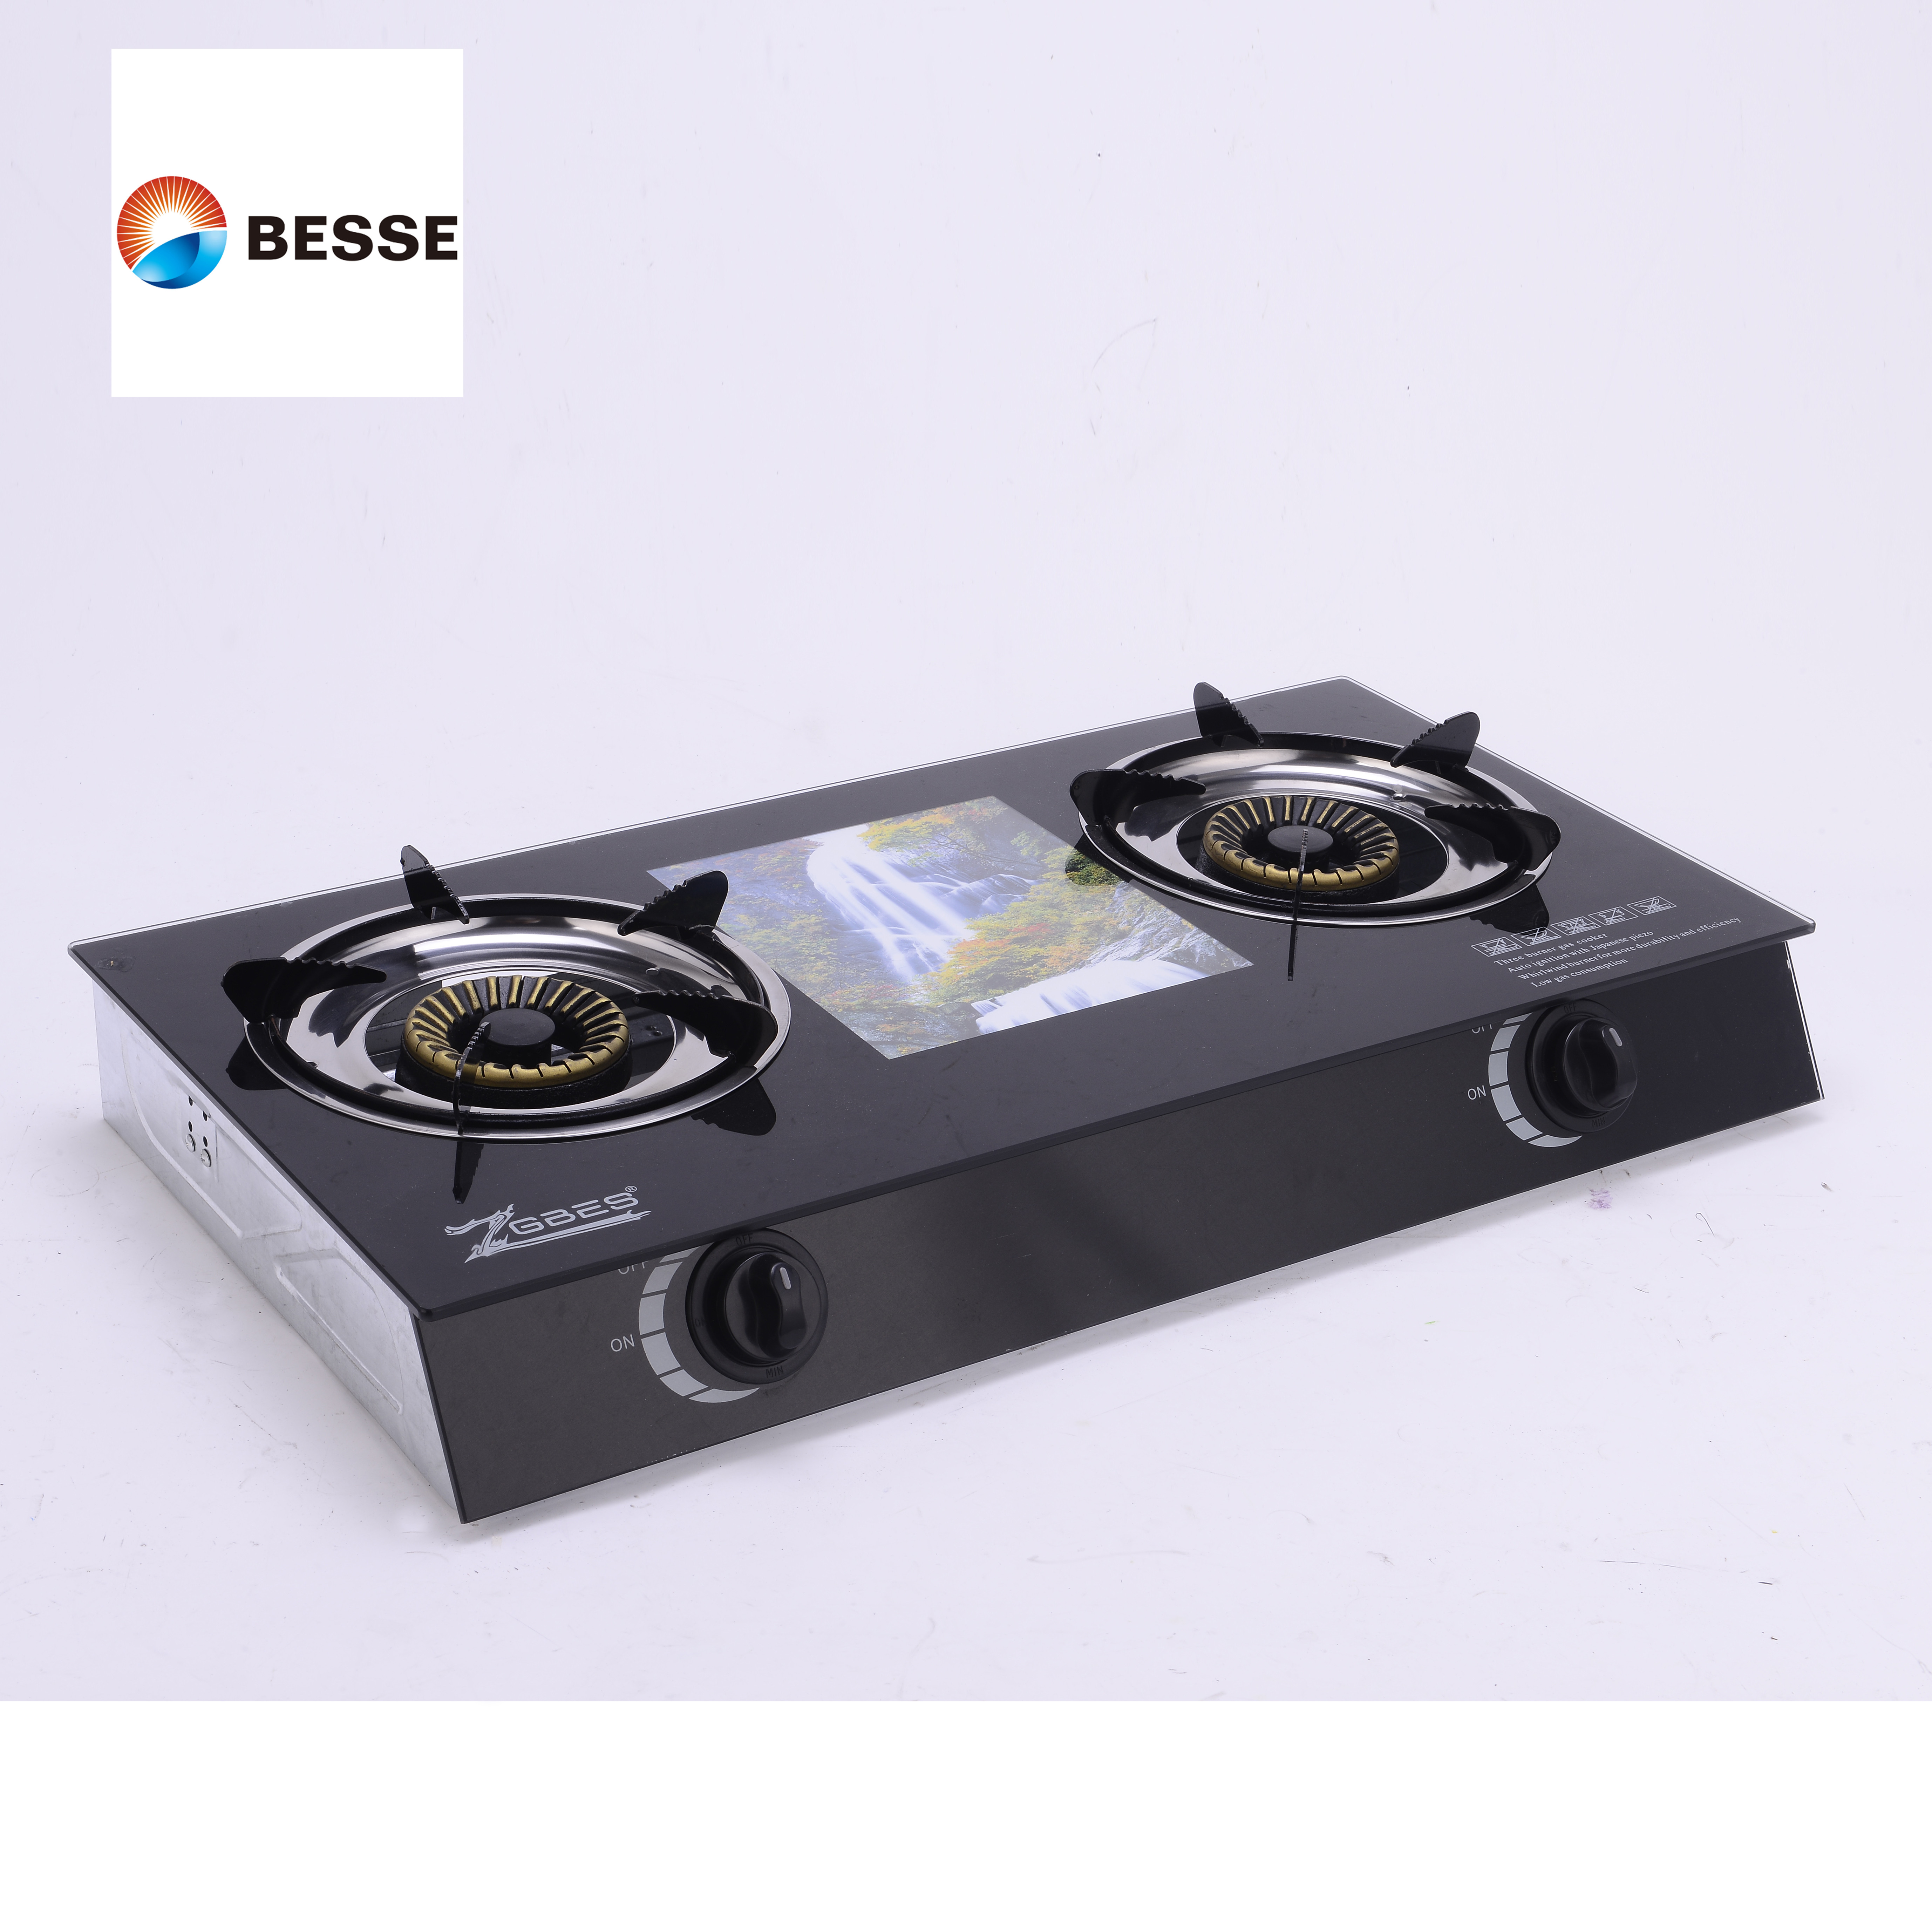 Temper Glass Cooking Gas Stove